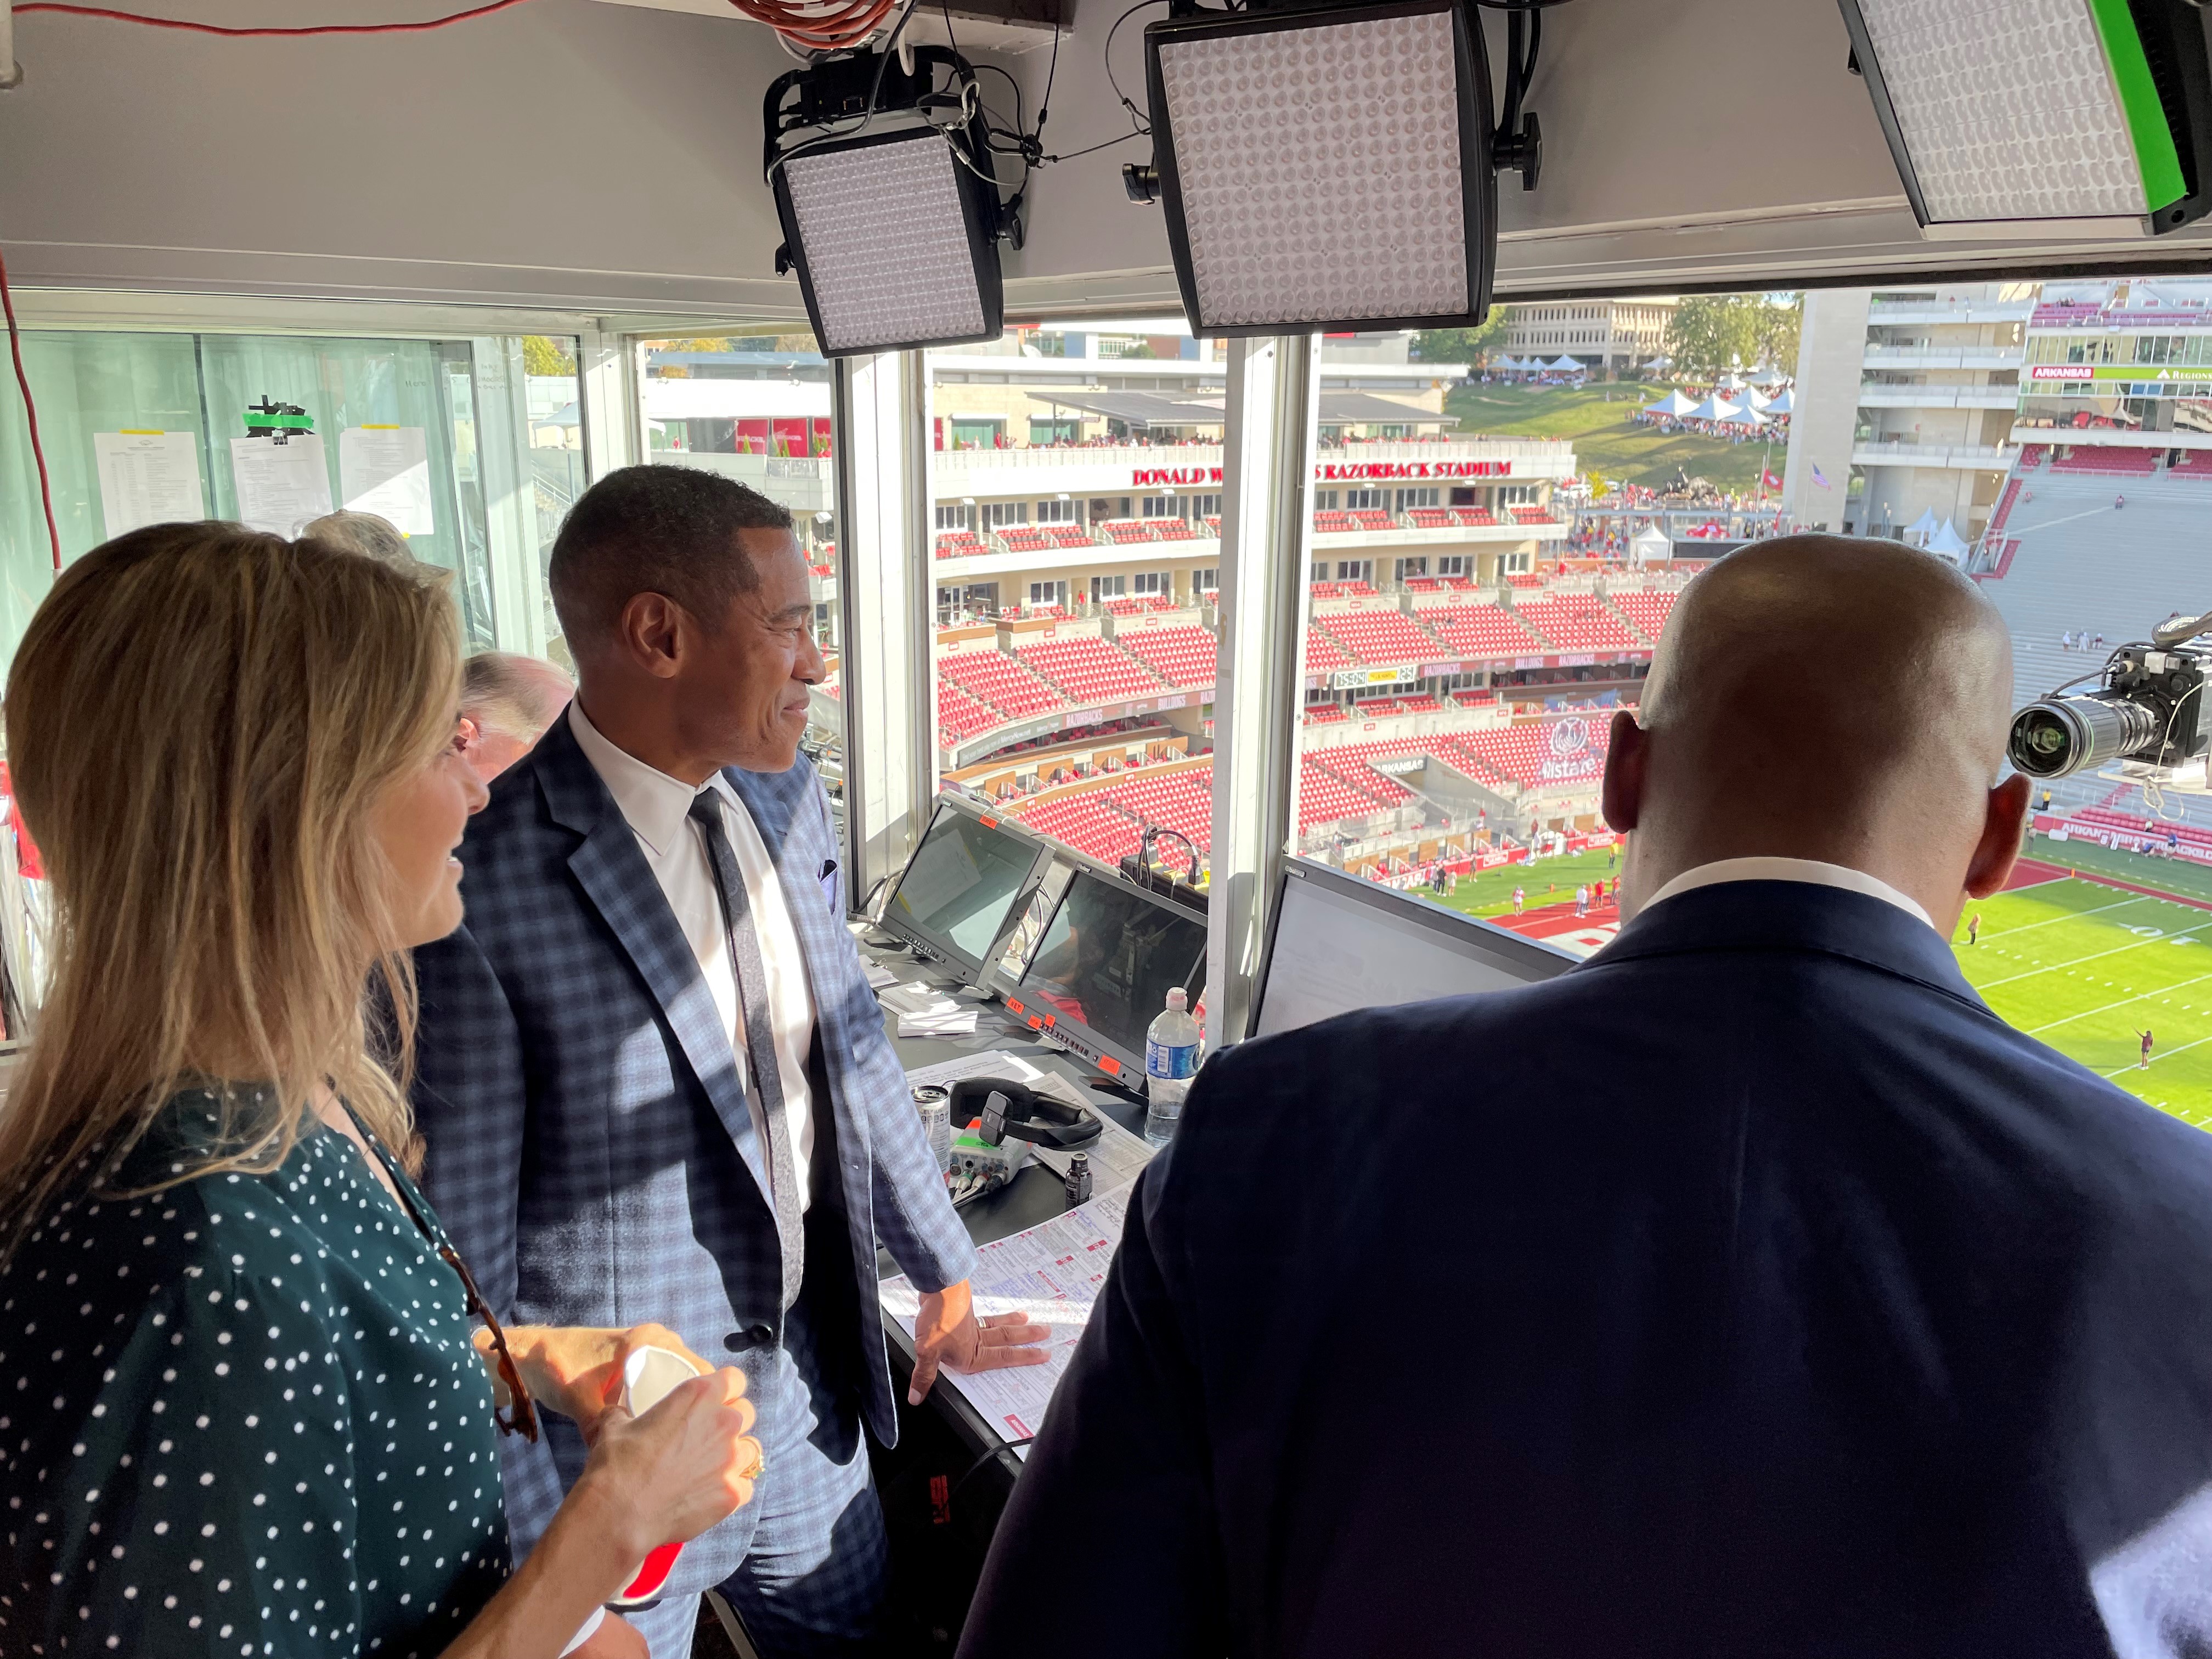 Gifford and colleague in press box overlooking football field, courtesy